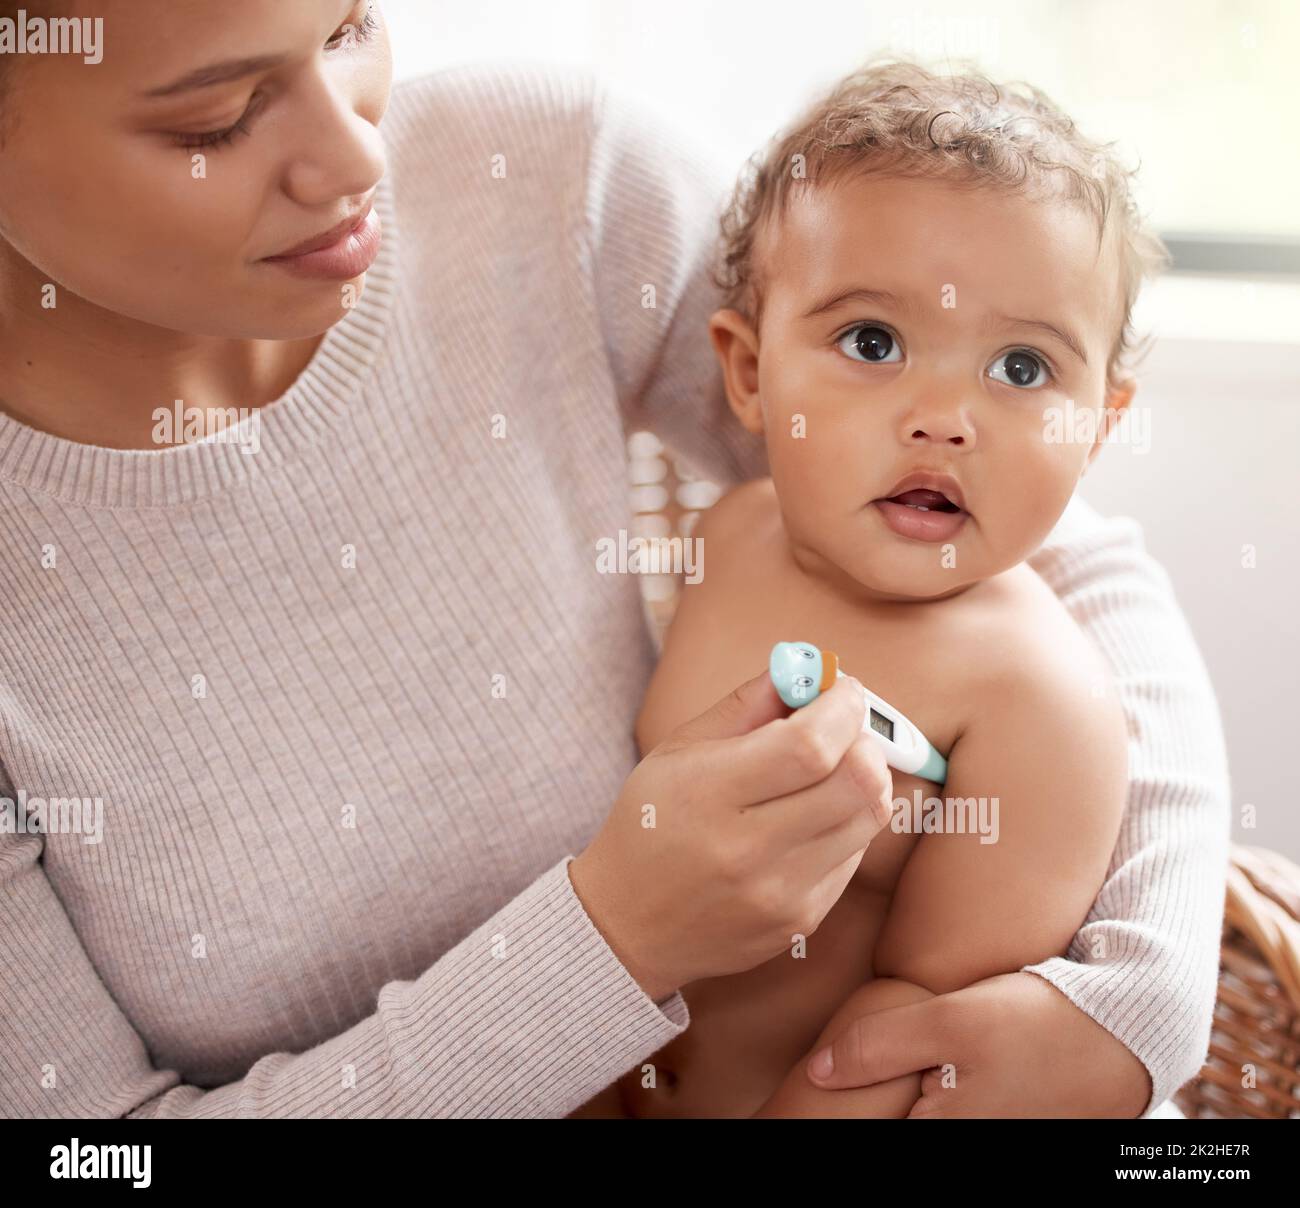 You feel a bit warm to me. Shot of a baby crying while having her temperature checked by her mother. Stock Photo